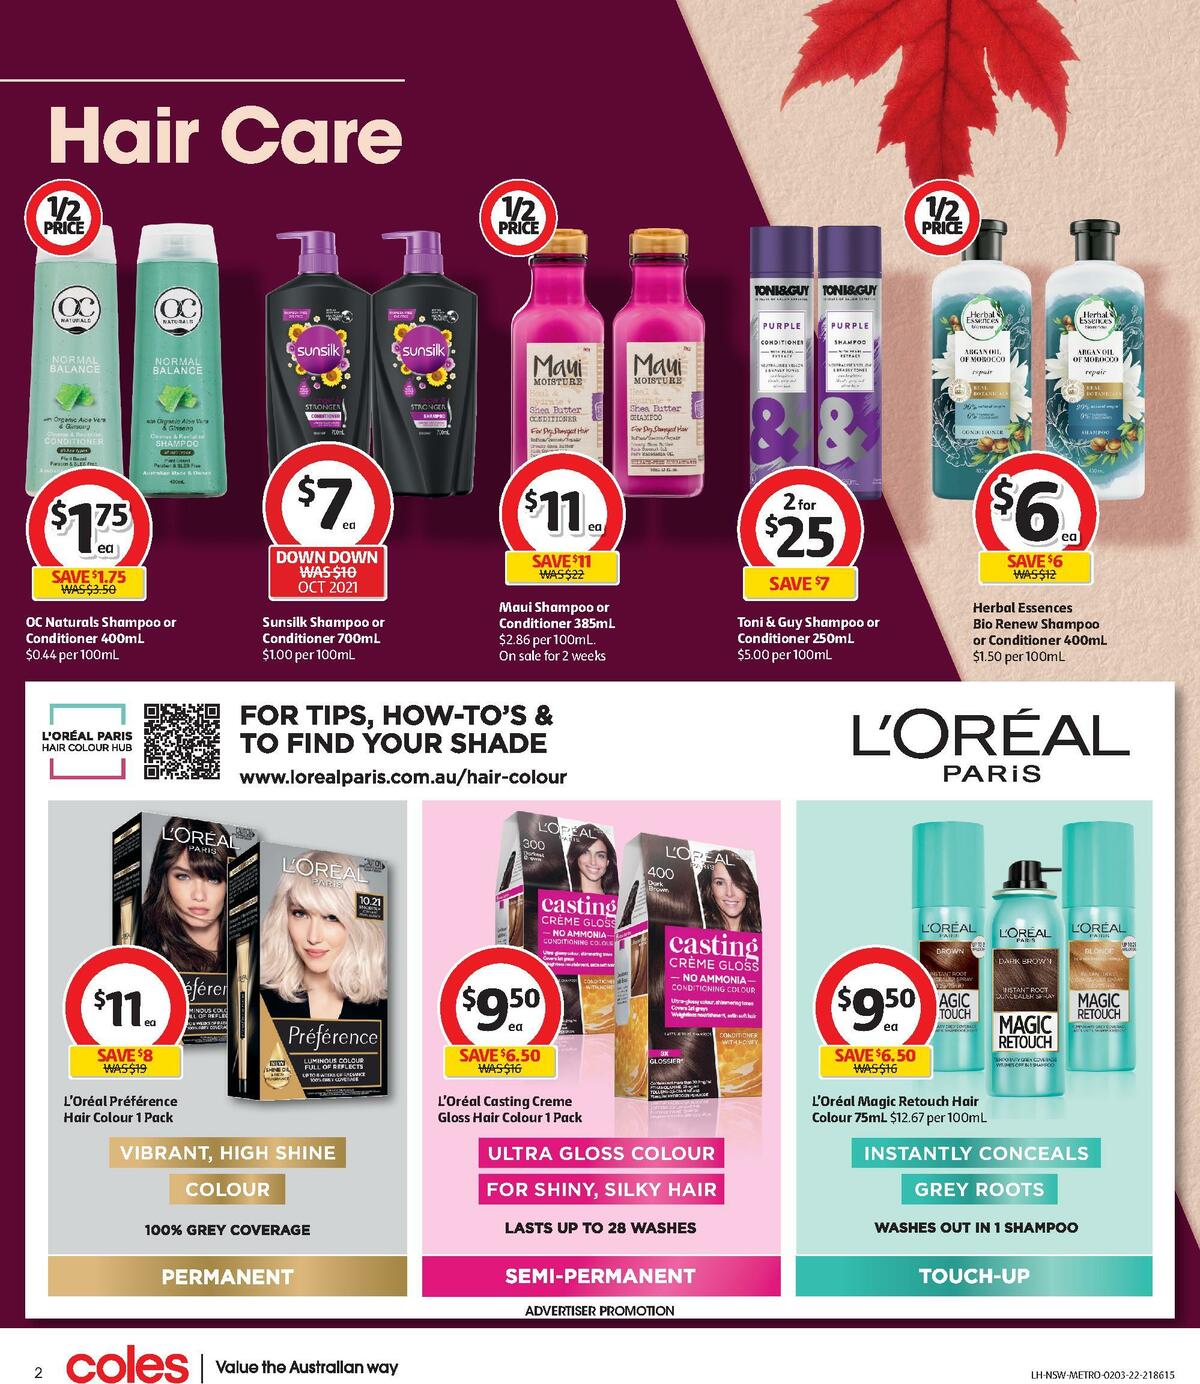 Coles Health & Beauty Catalogues from 2 March